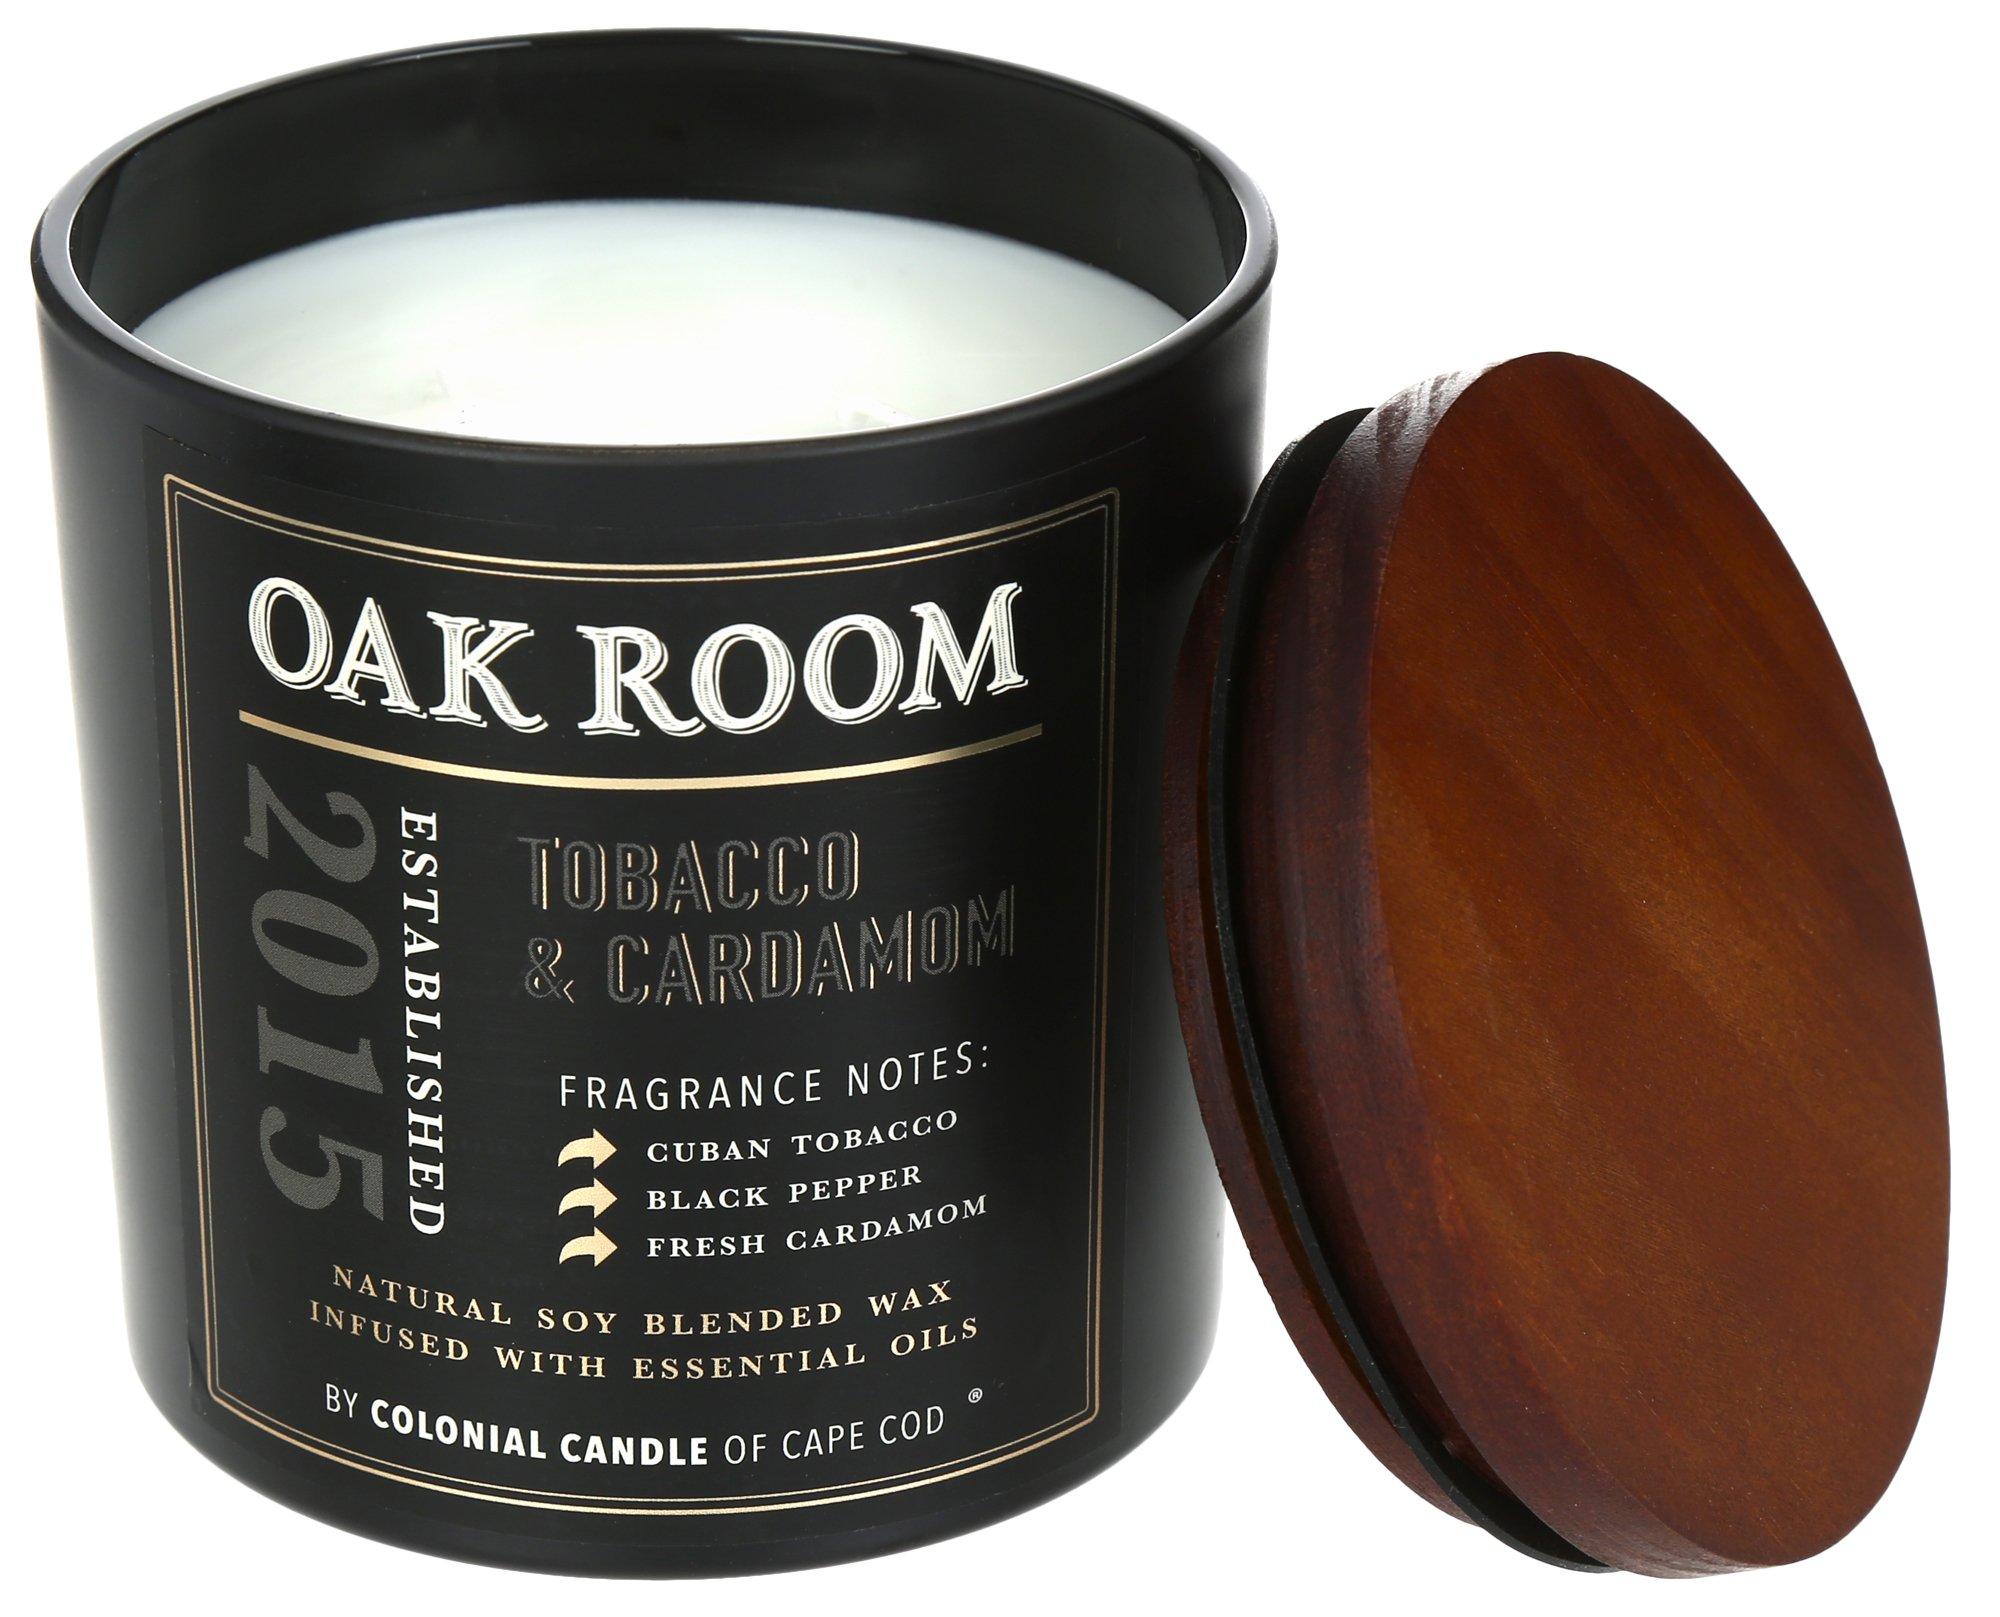 13 oz Tobacco & Cardamom Scented Candle